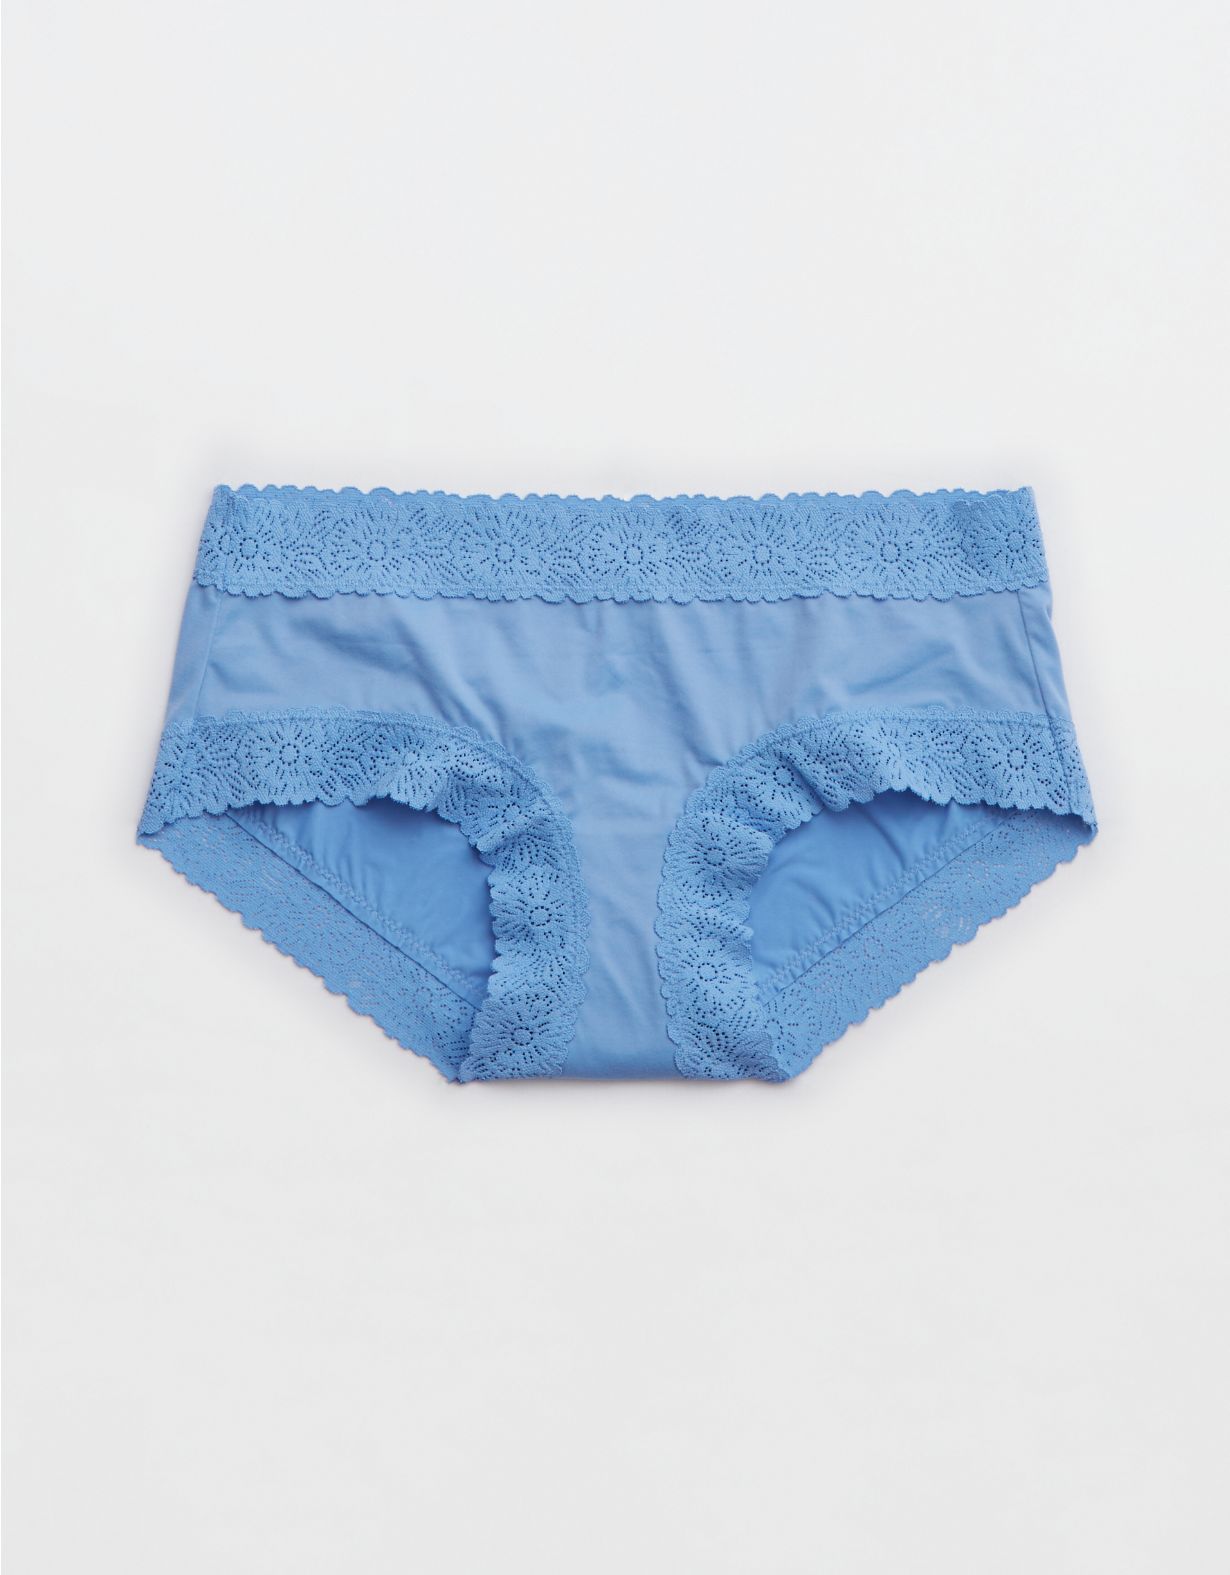 Aerie Sunnie Blossom Lace Boybrief Underwear | American Eagle Outfitters (US & CA)